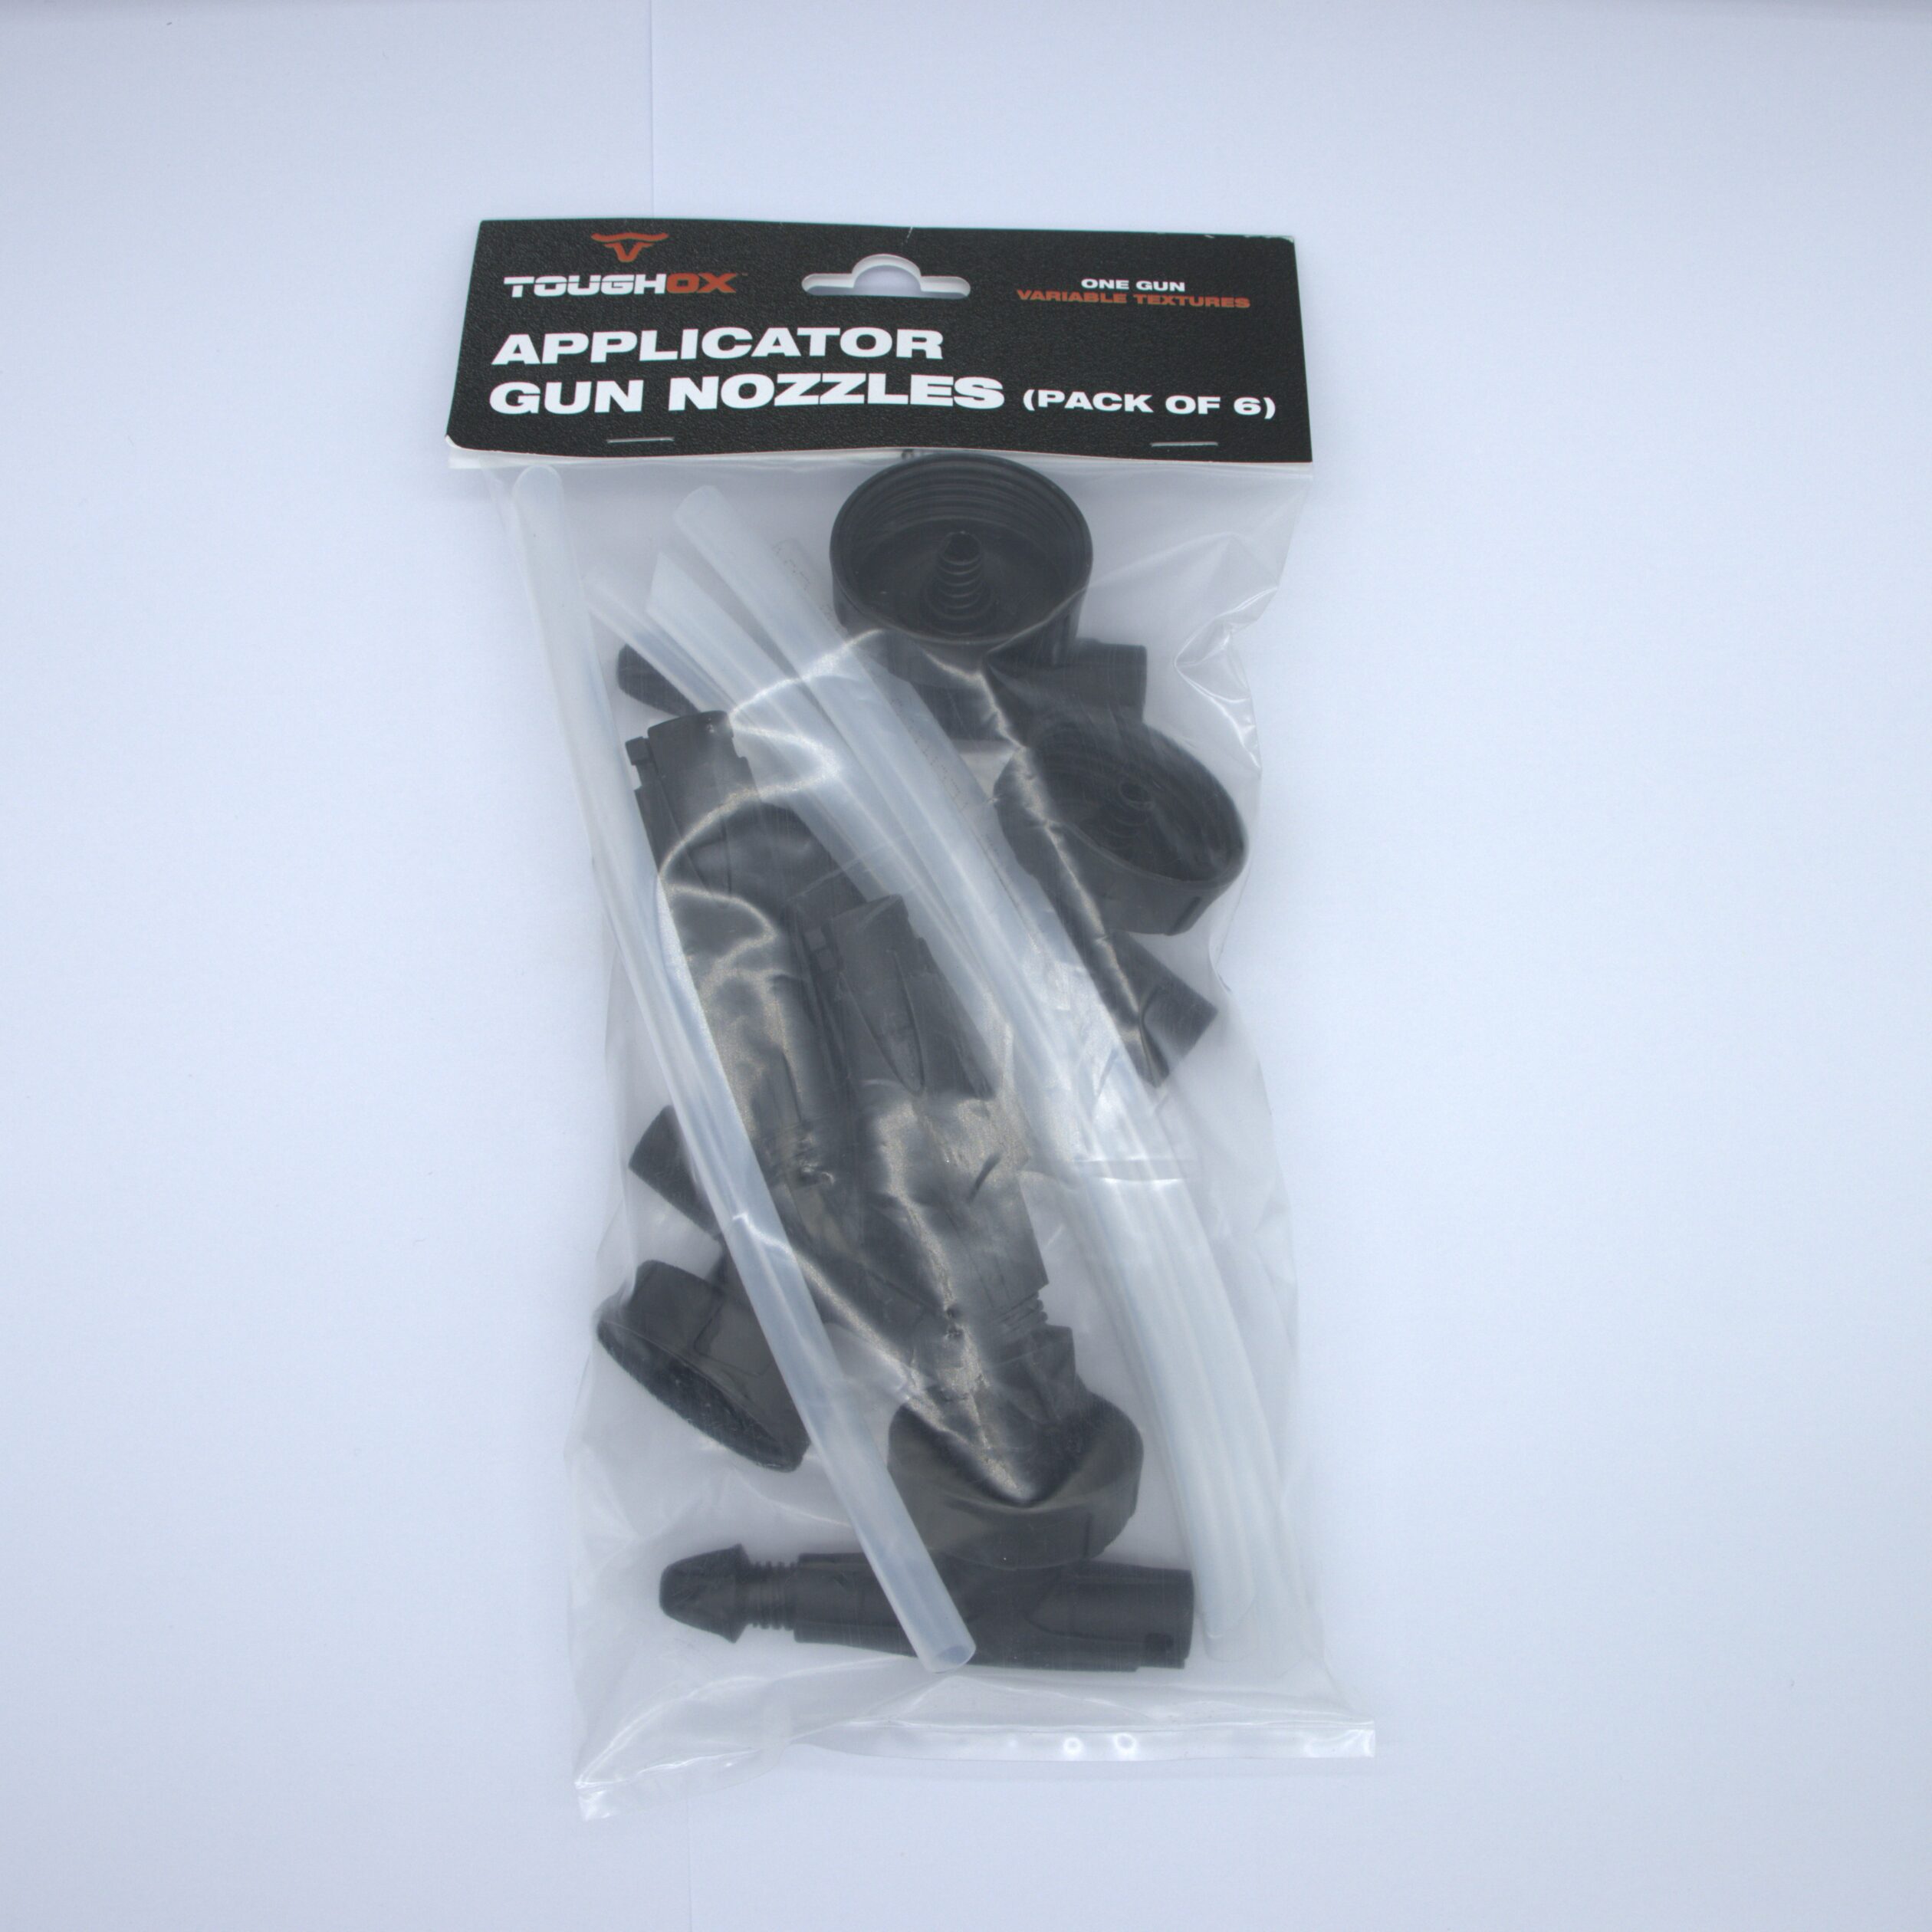 Truck Bed Liner – Spare nozzles and hose (Pack of 6) Product Image